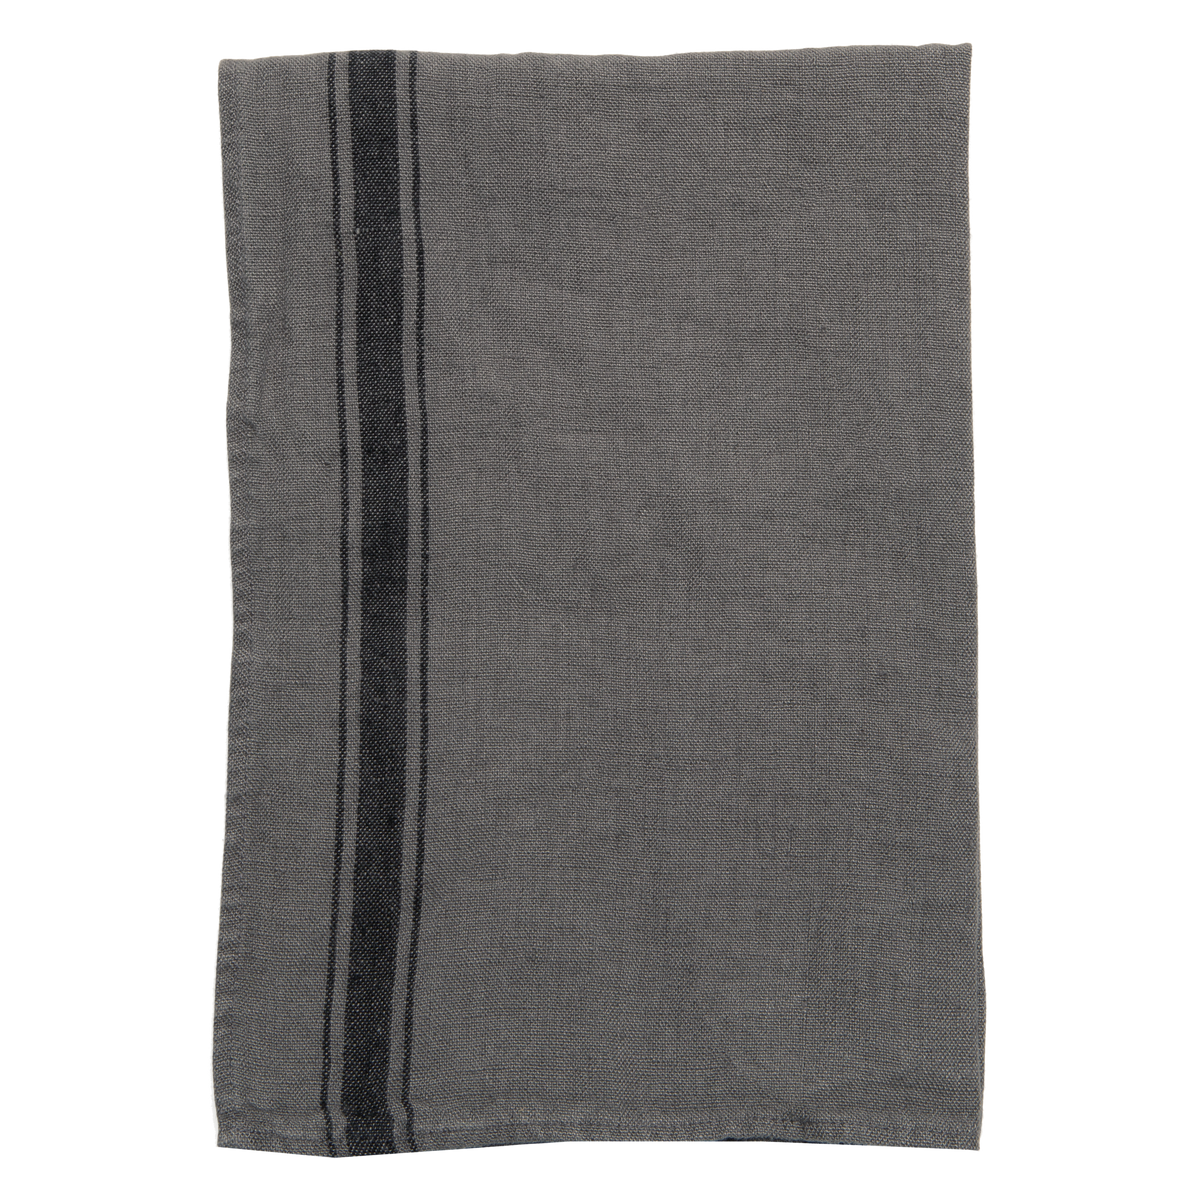 This Stonewashed Linen Tea Towel is sustainably crafted from 100% stonewash linen.